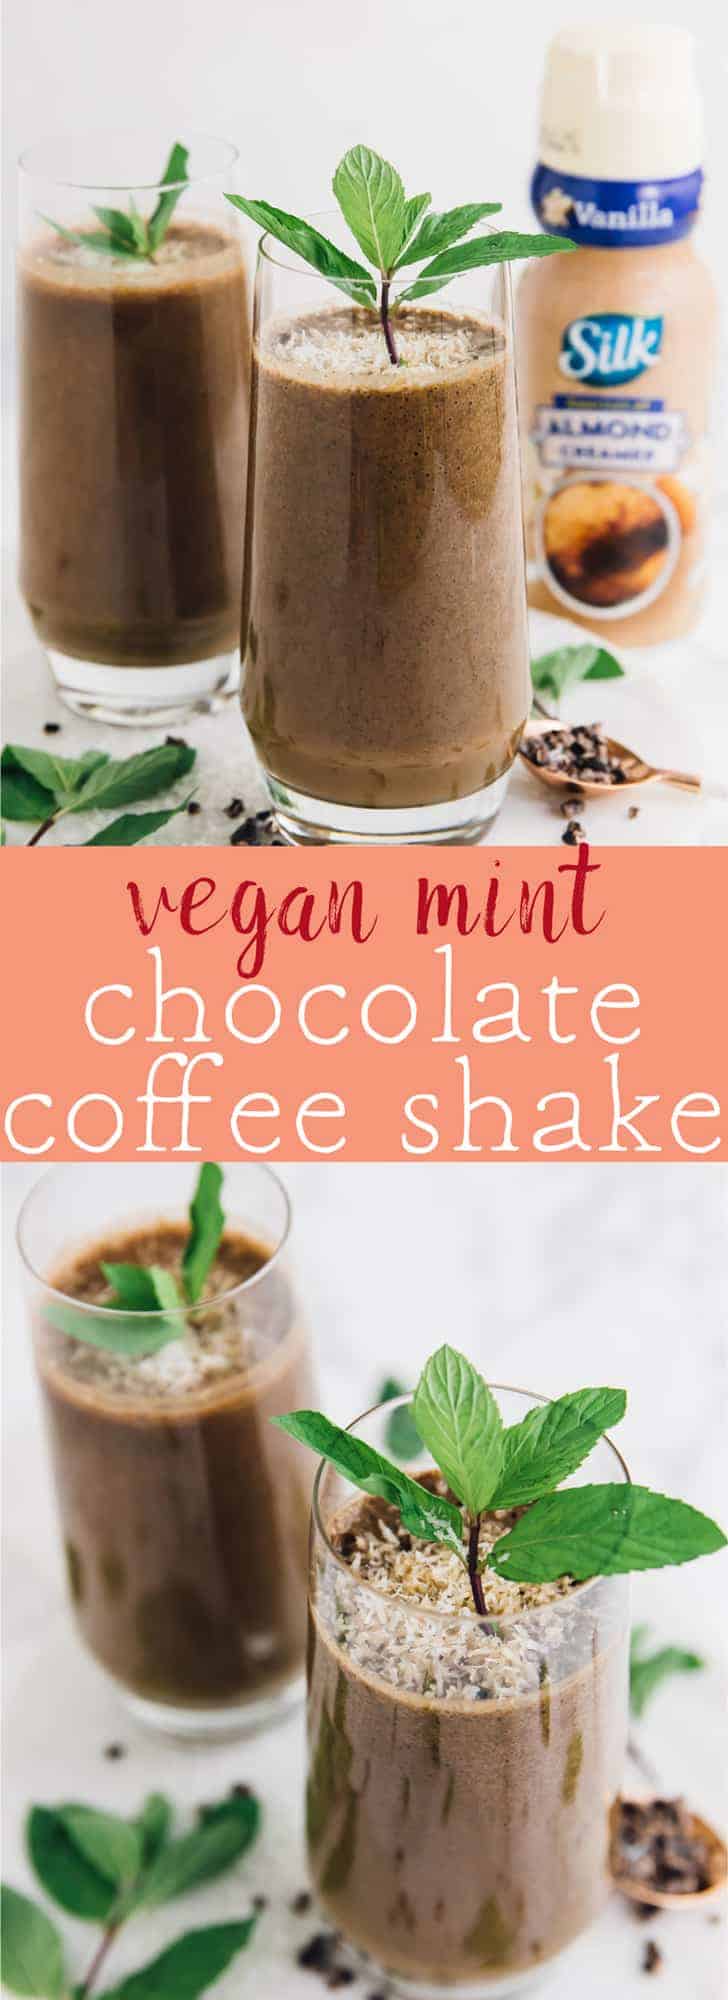 This Mint Chocolate Coffee Shake will wake you up in the morning! It's smooth, deliciously chocolatey and so easy to make! via https://jessicainthekitchen.com